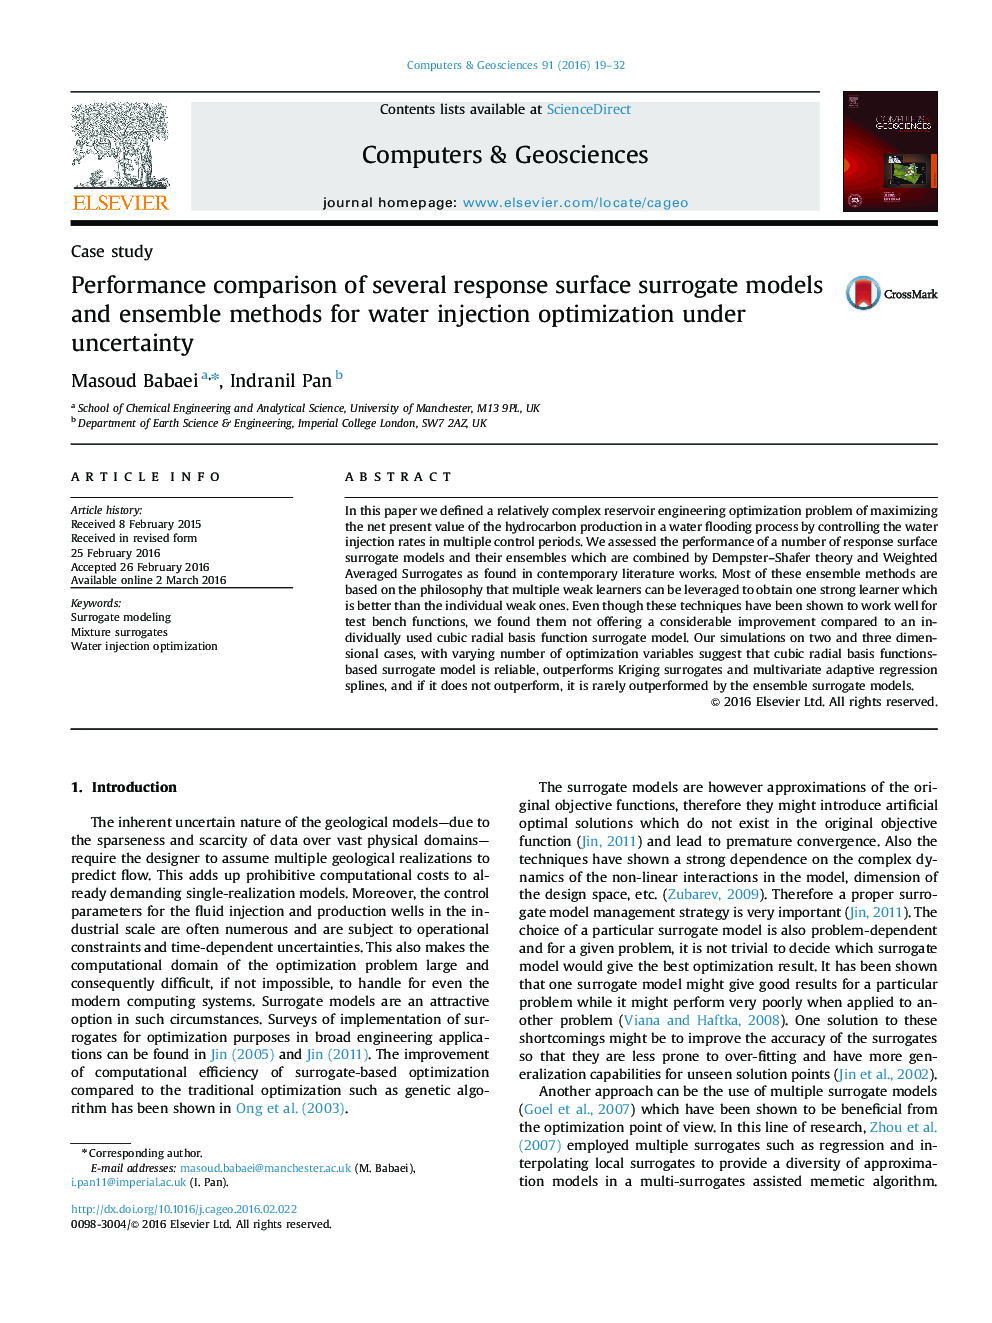 Performance comparison of several response surface surrogate models and ensemble methods for water injection optimization under uncertainty